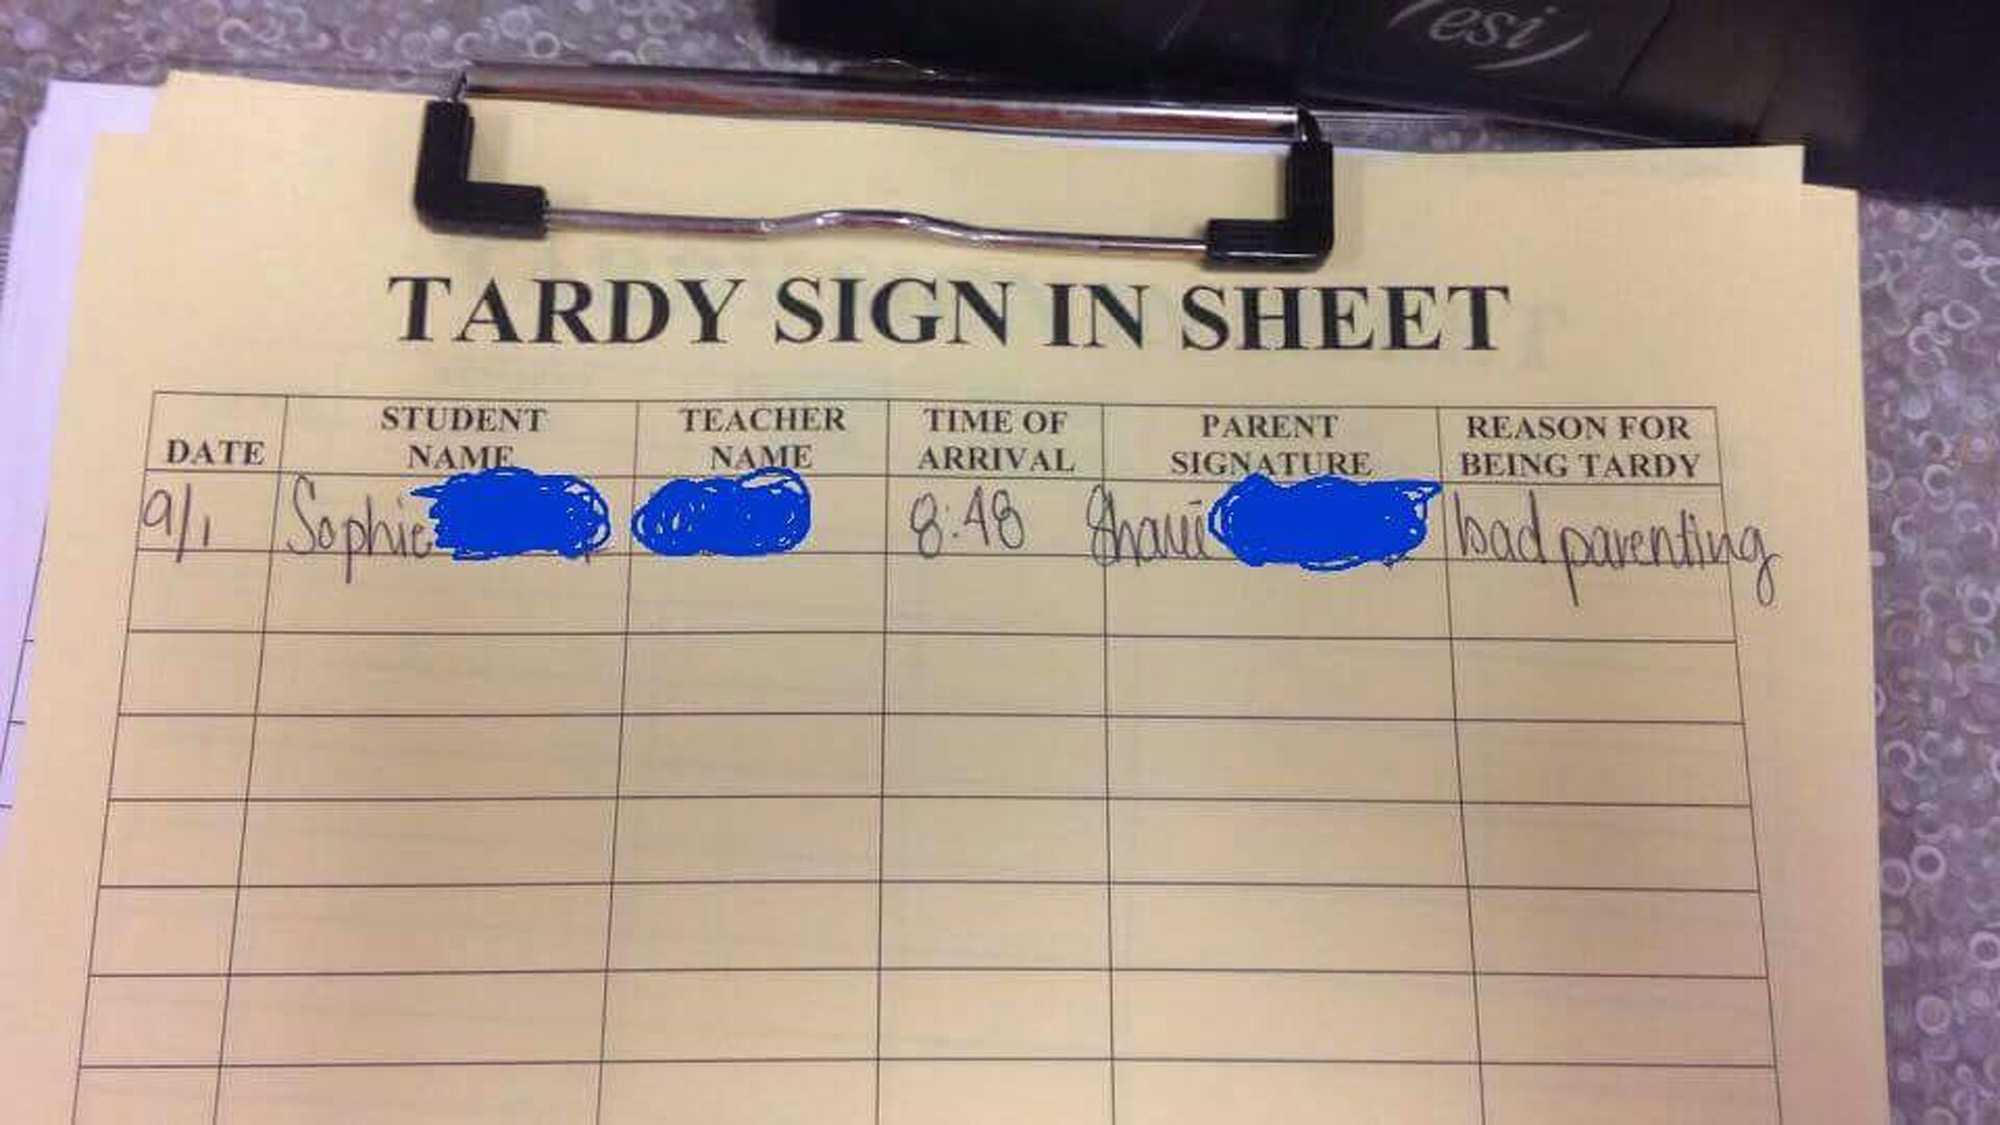 This mom's hilarious excuse for her daughter's tardiness is so relatable